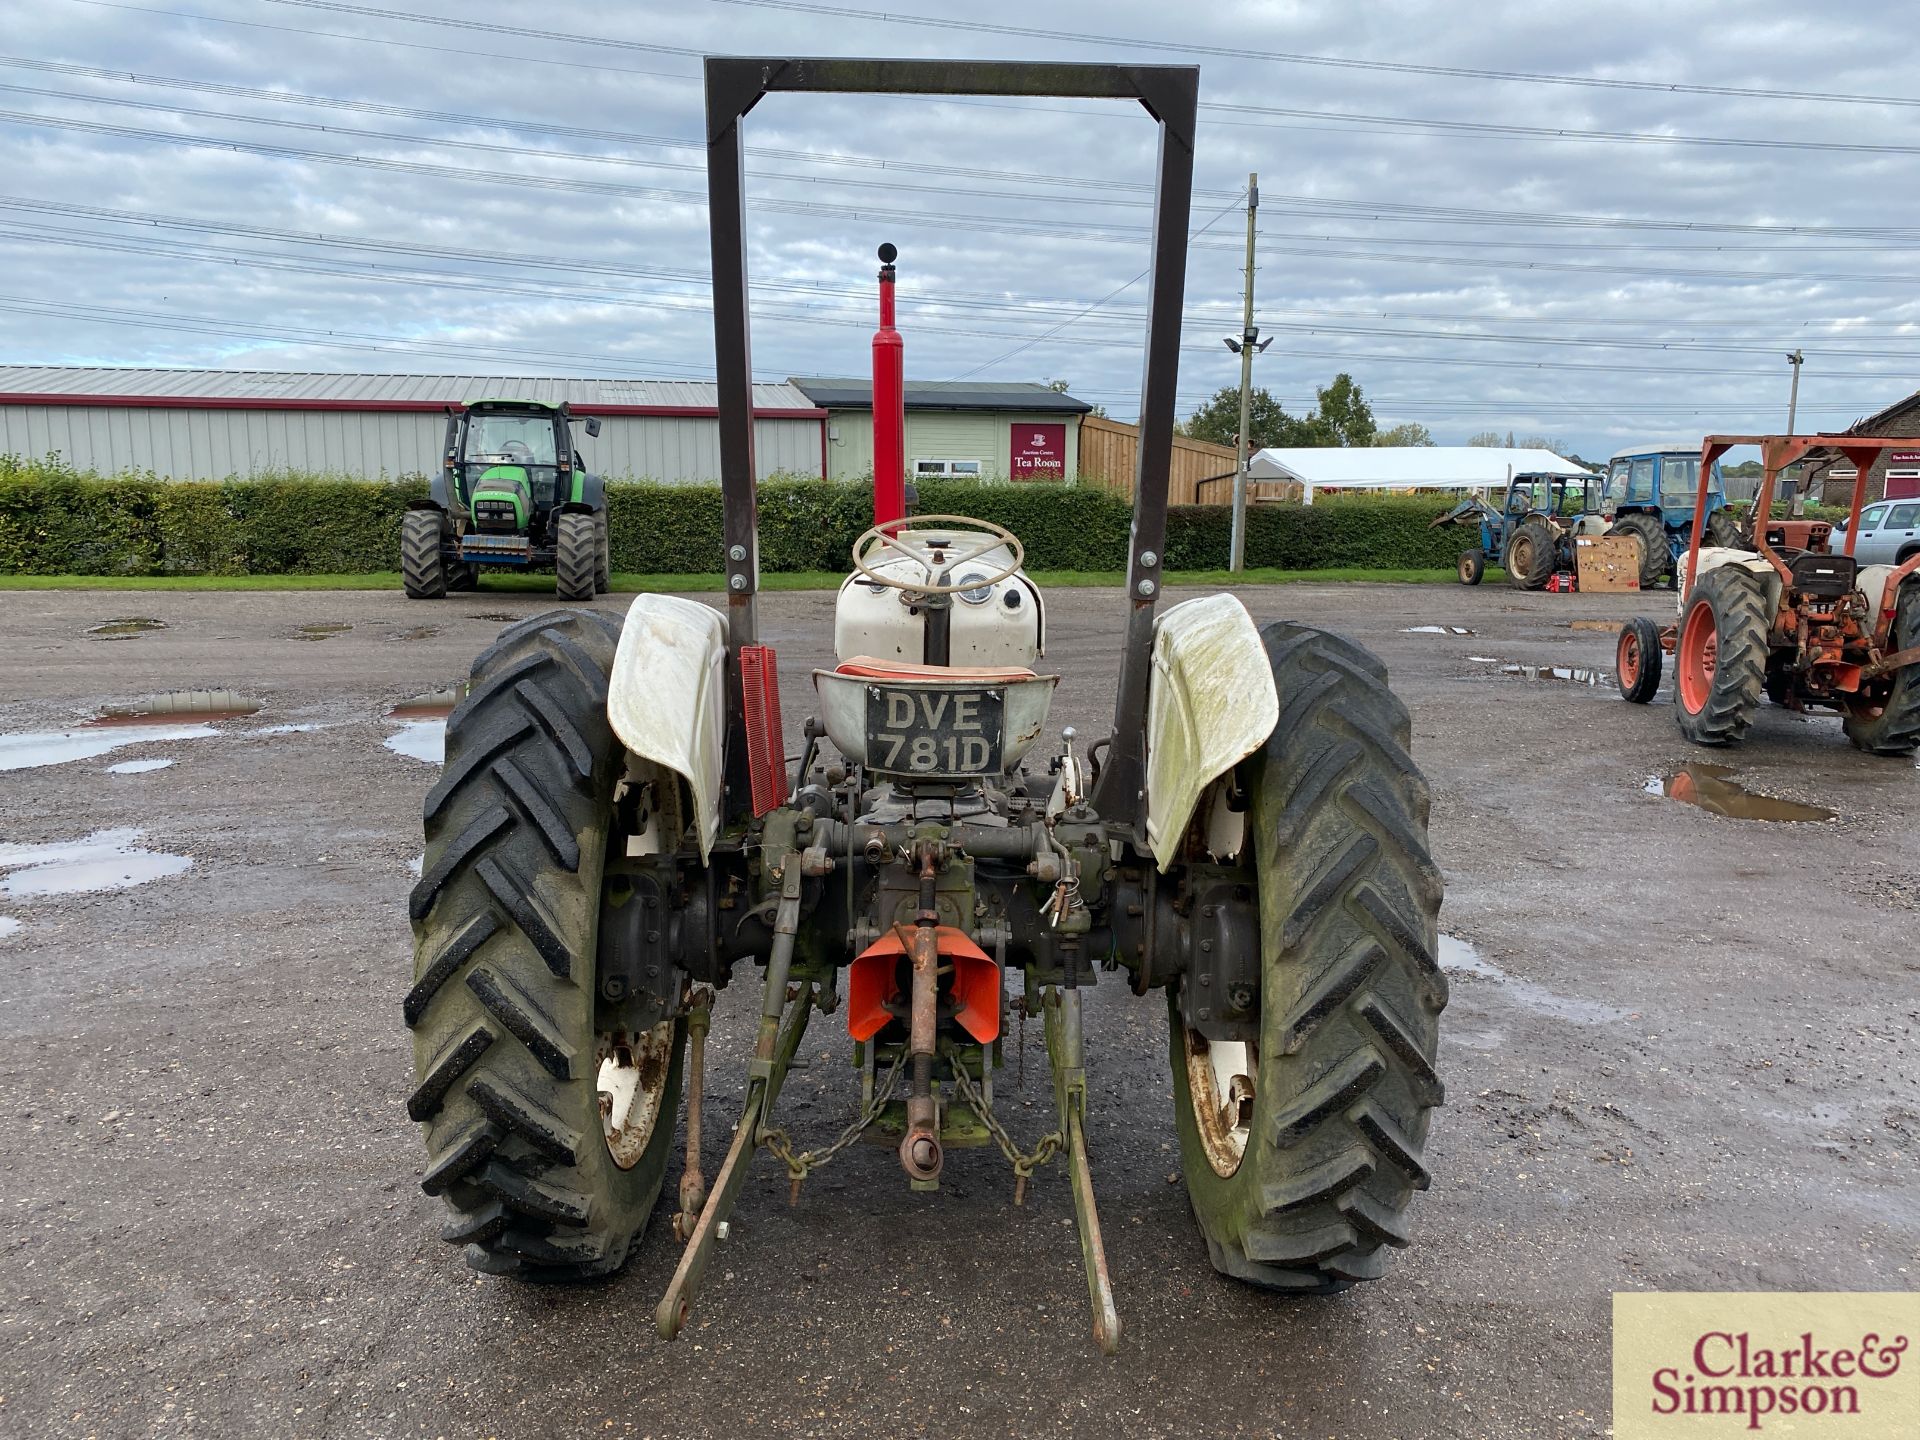 David Brown 990 Selectamatic 2WD tractor. Registration DUE 781D (no paperwork). Serial number 990A/ - Image 4 of 31